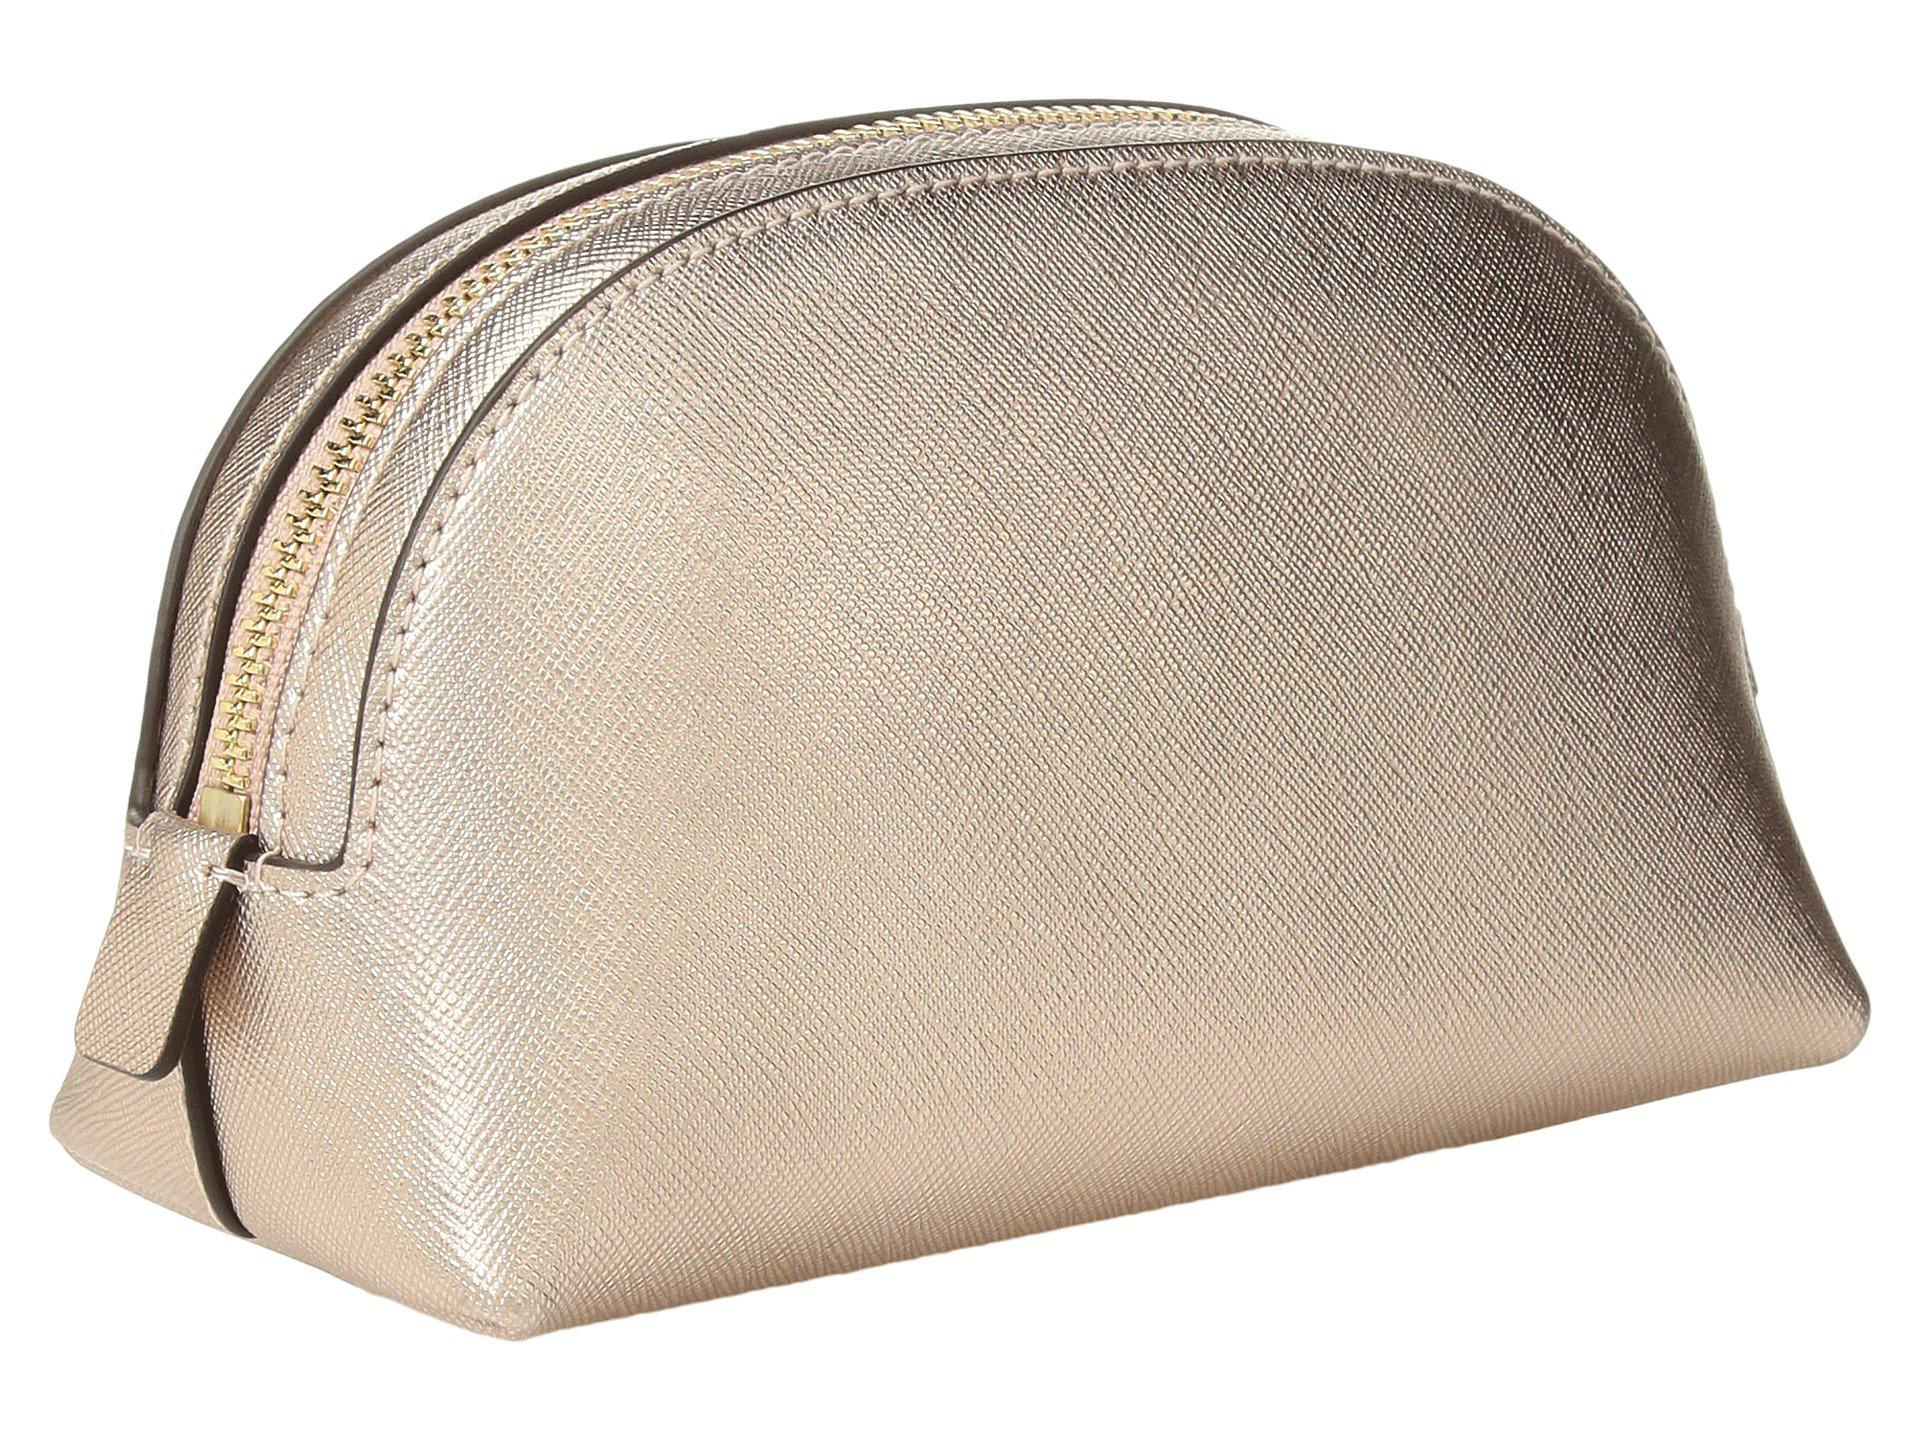  Miche Luxe Make up Cosmetic Bag : Clothing, Shoes & Jewelry